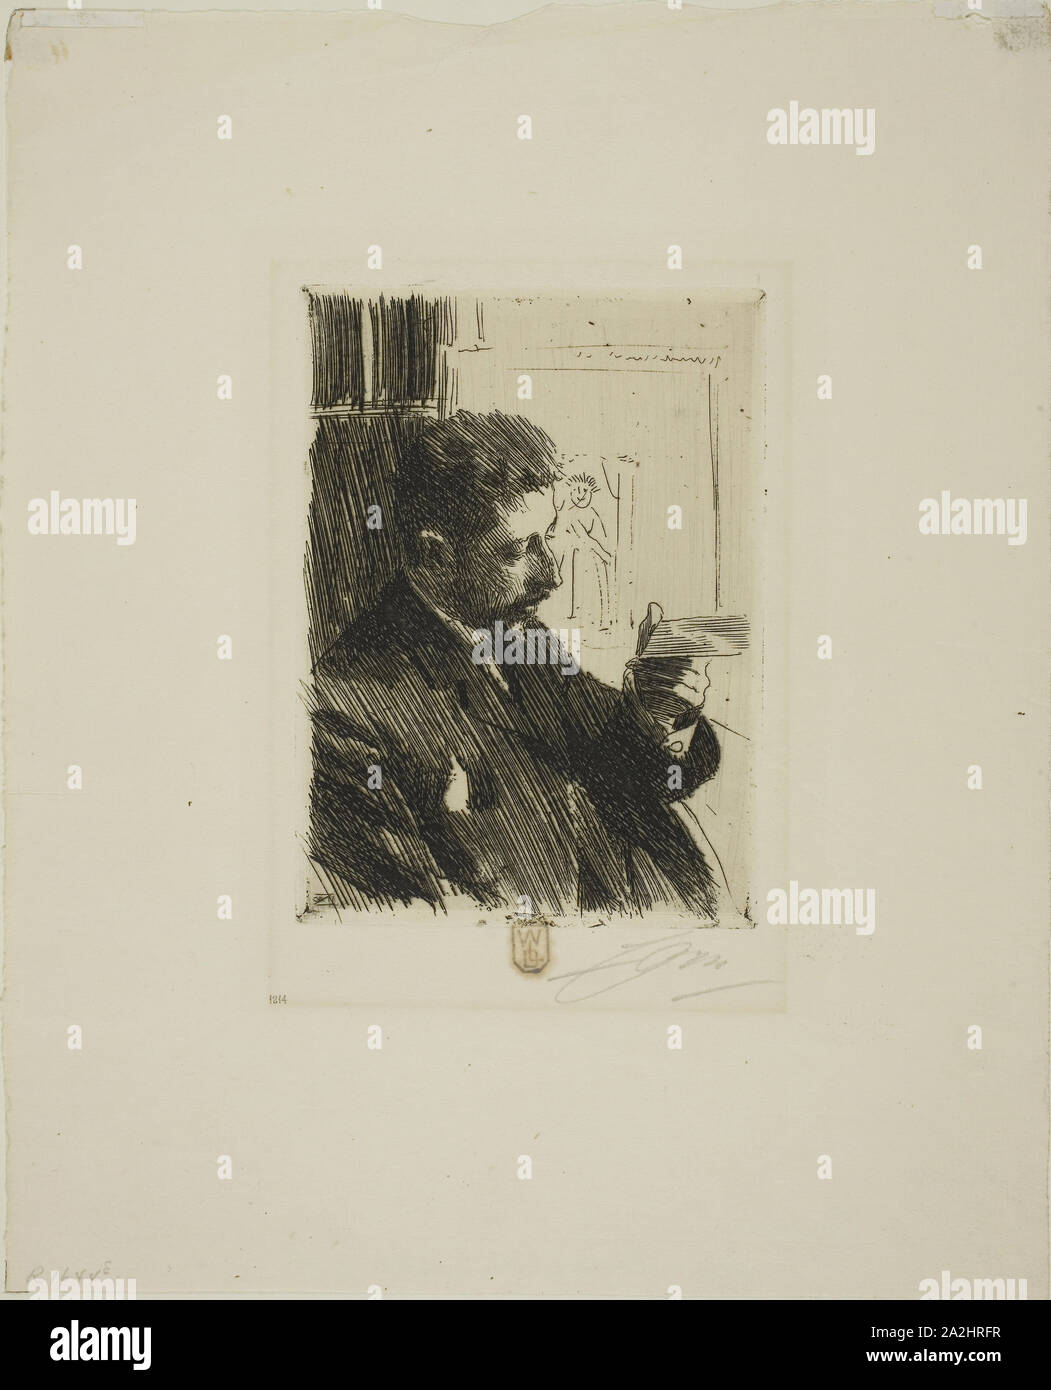 H. R. H. Prince Eugen of Sweden, 1891, Anders Zorn, Swedish, 1860-1920, Sweden, Etching on ivory laid paper, 134 x 96 mm (image), 139 x 101 mm (plate), 282 x 228 mm (sheet Stock Photo